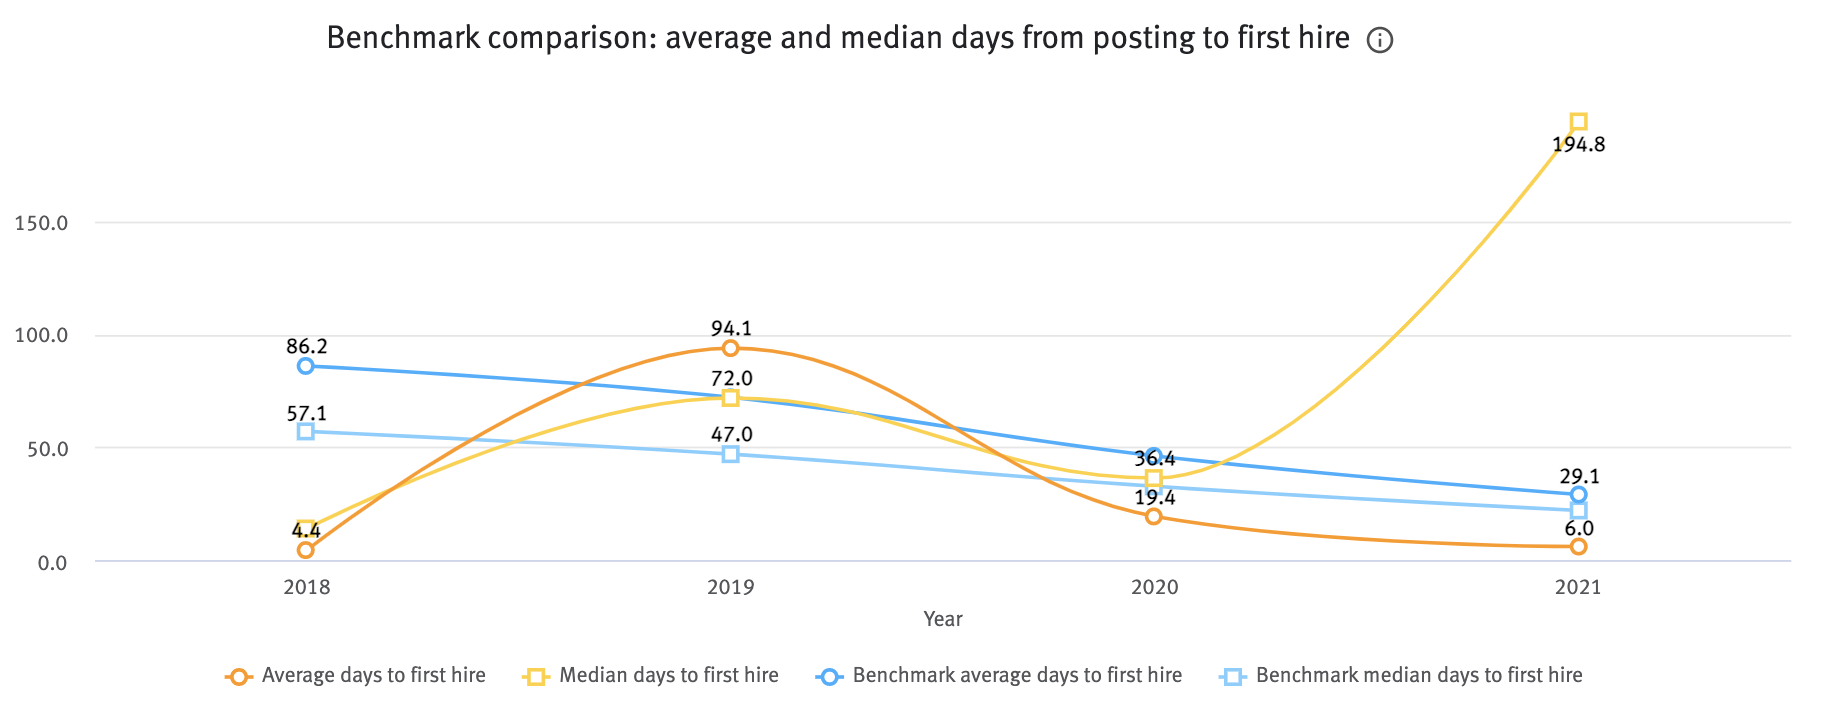 Benchmark comparison average and median days from posting to first hire chart